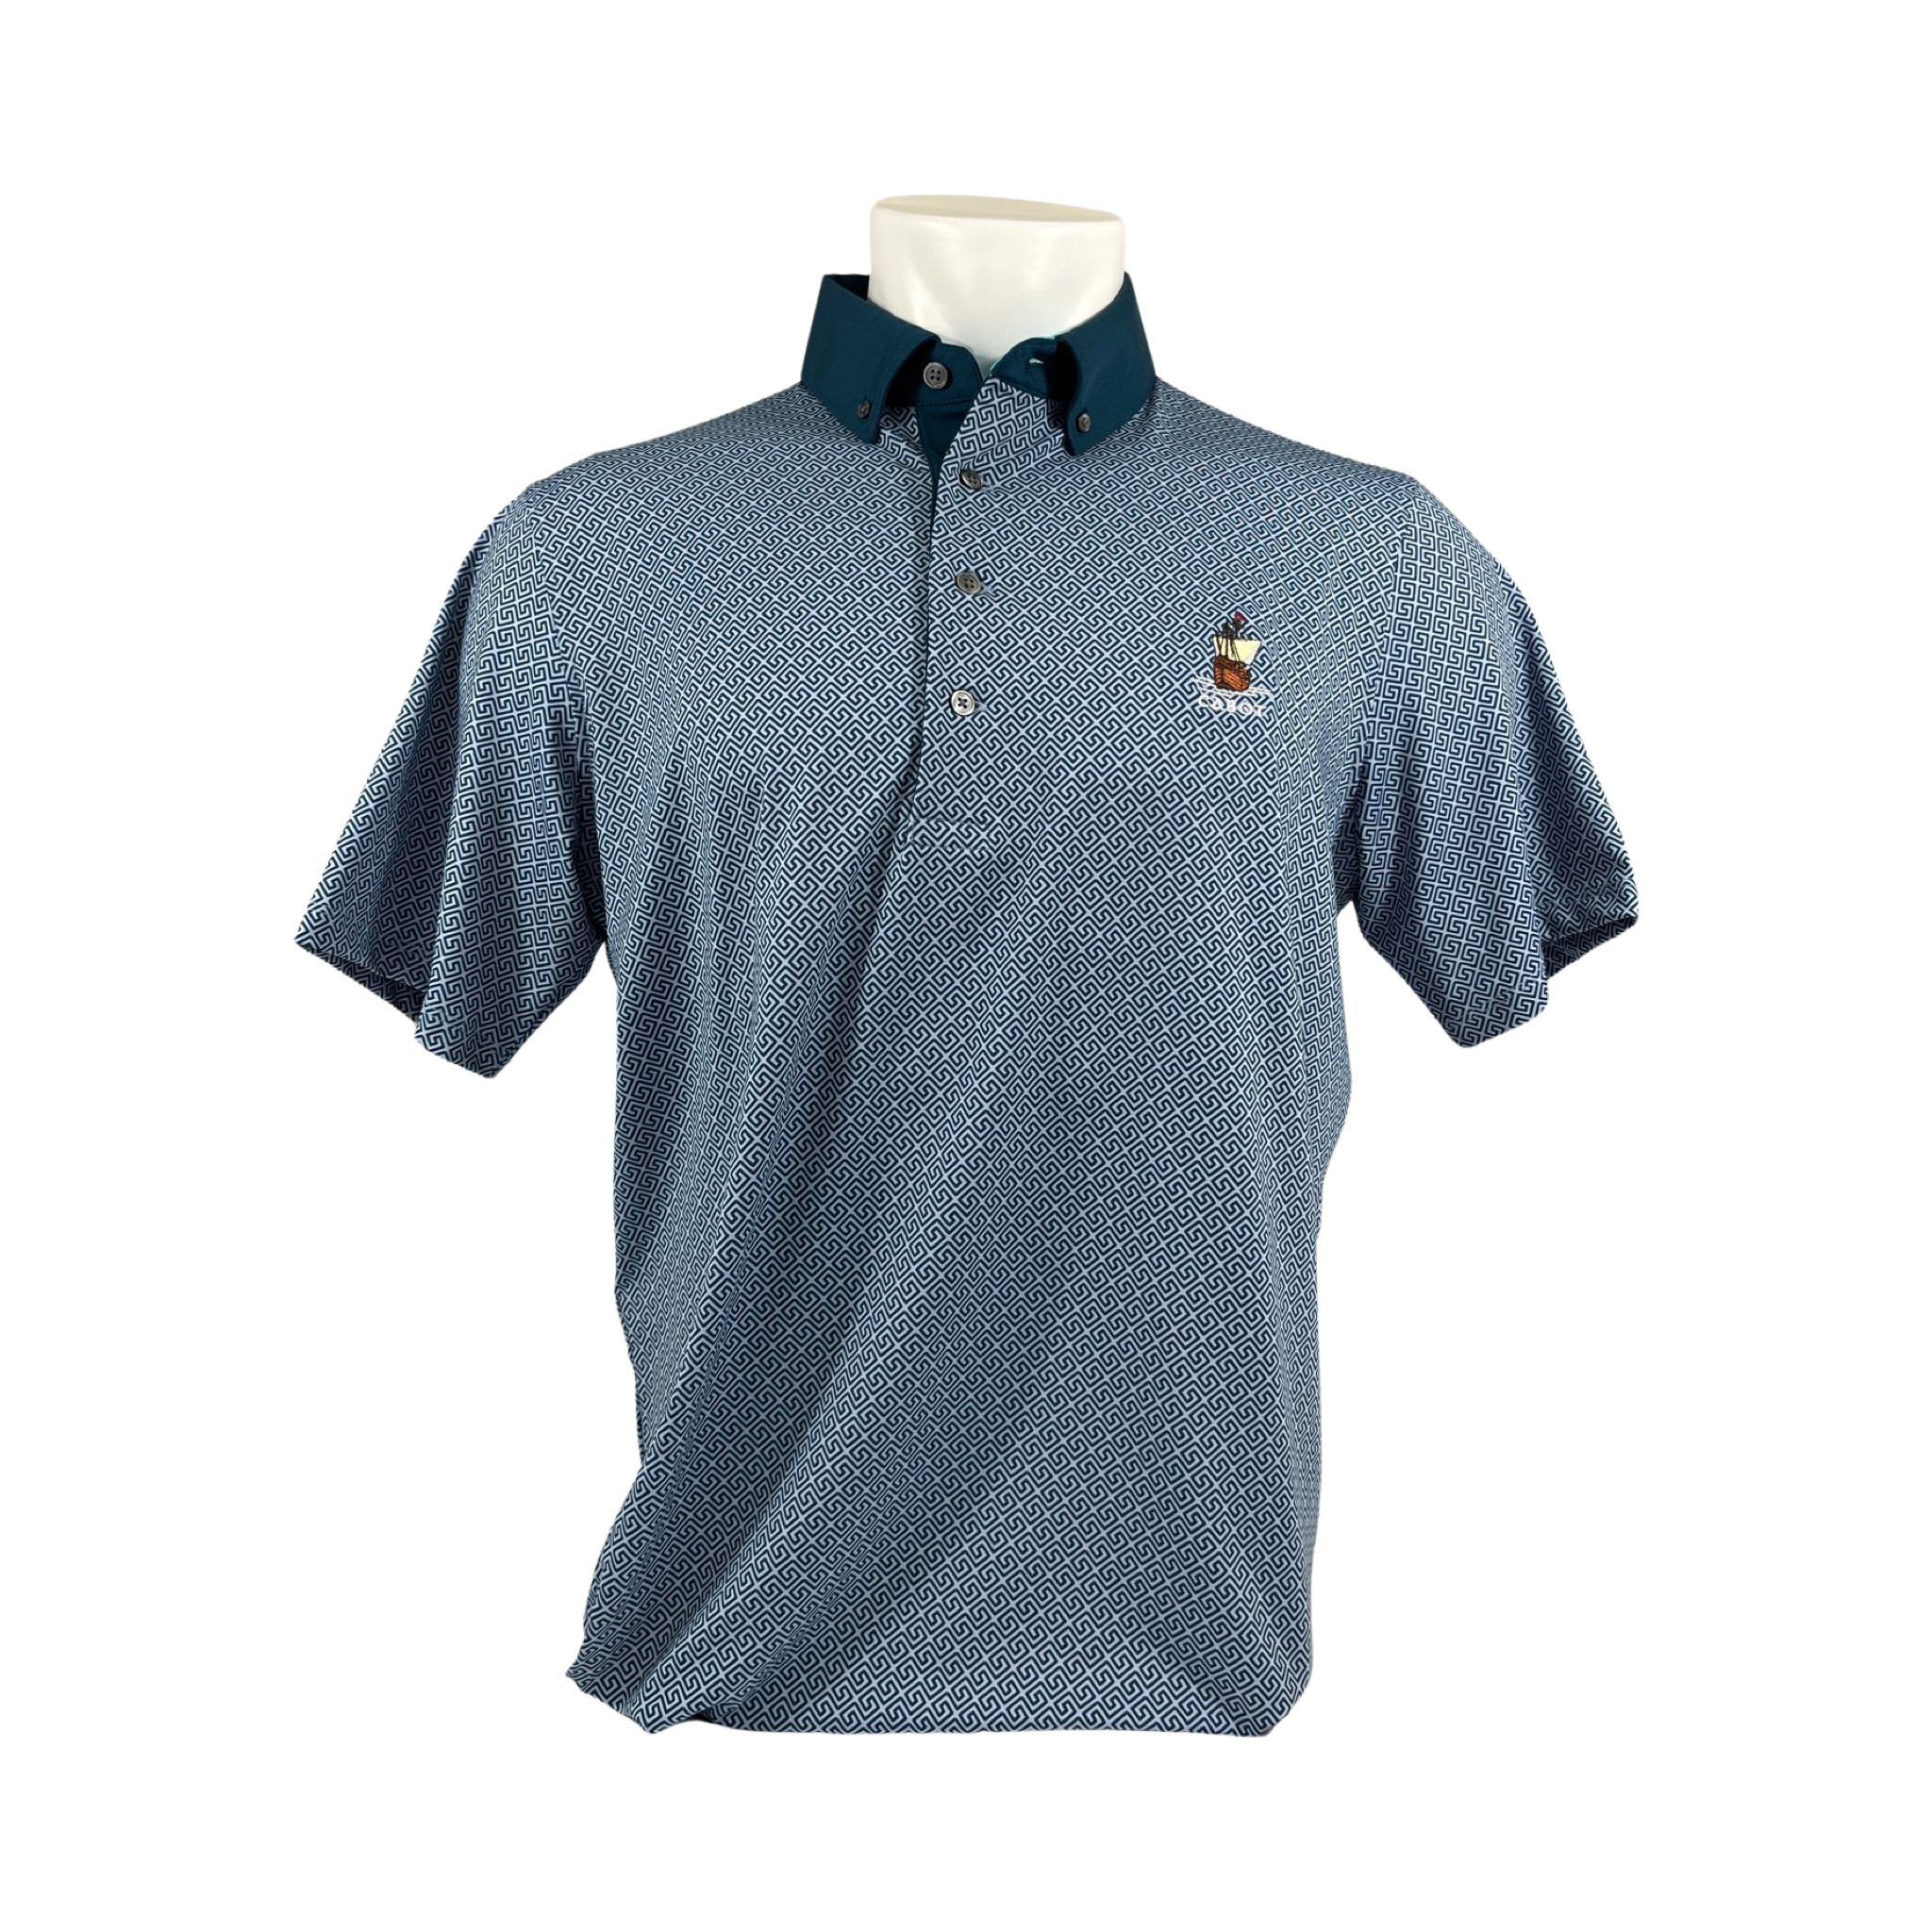 Greyson Cabot Links Waves Polo